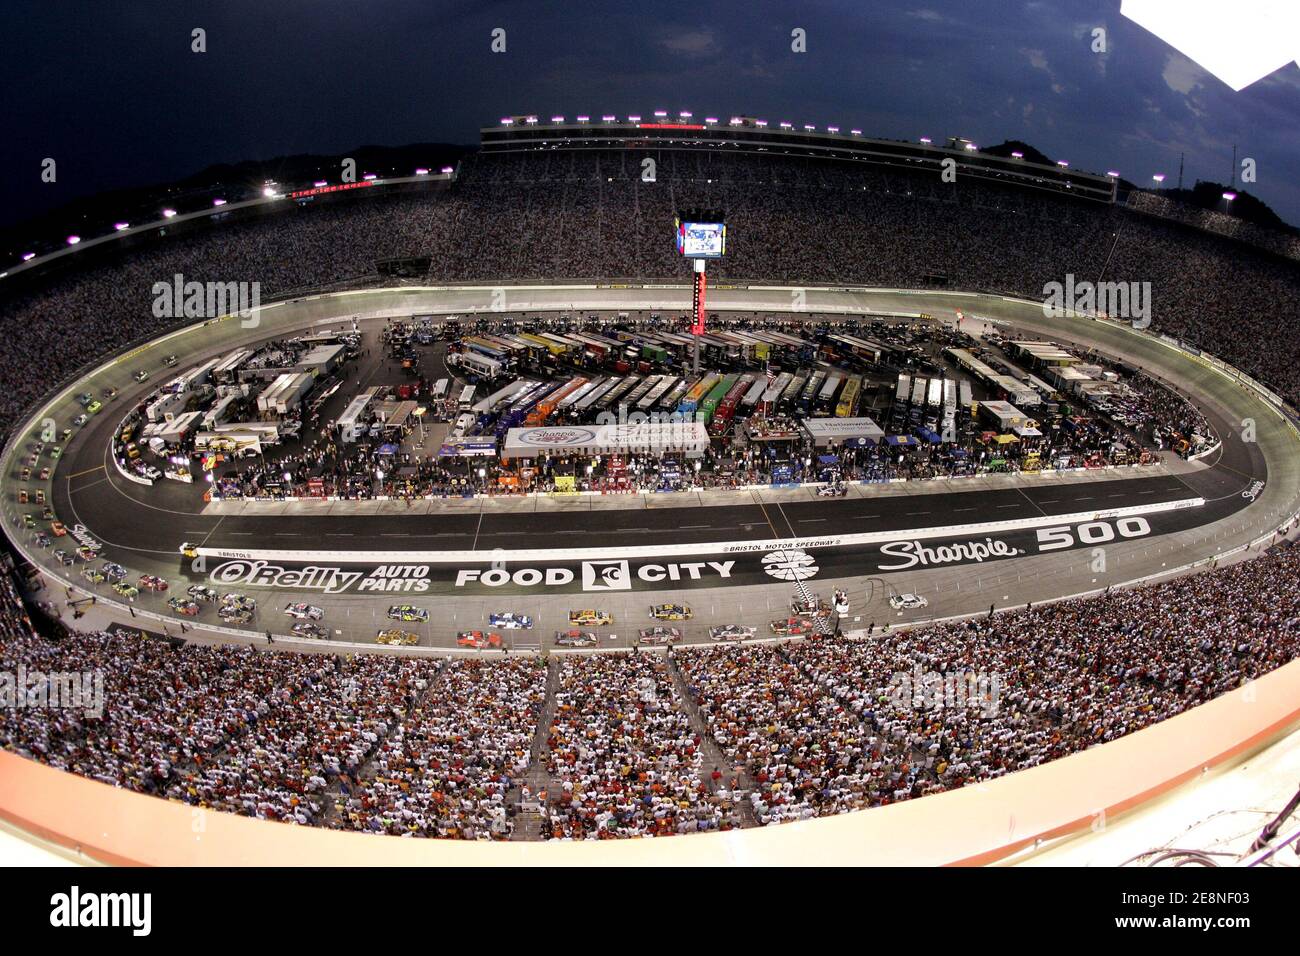 Overview of the Sharpie 500 at the Bristol Motor Speedway in Bristol, TN, USA on August 25, 2007. Photo by Cal Sport Media/Cameleon/ABACAPRESS.COM Stock Photo